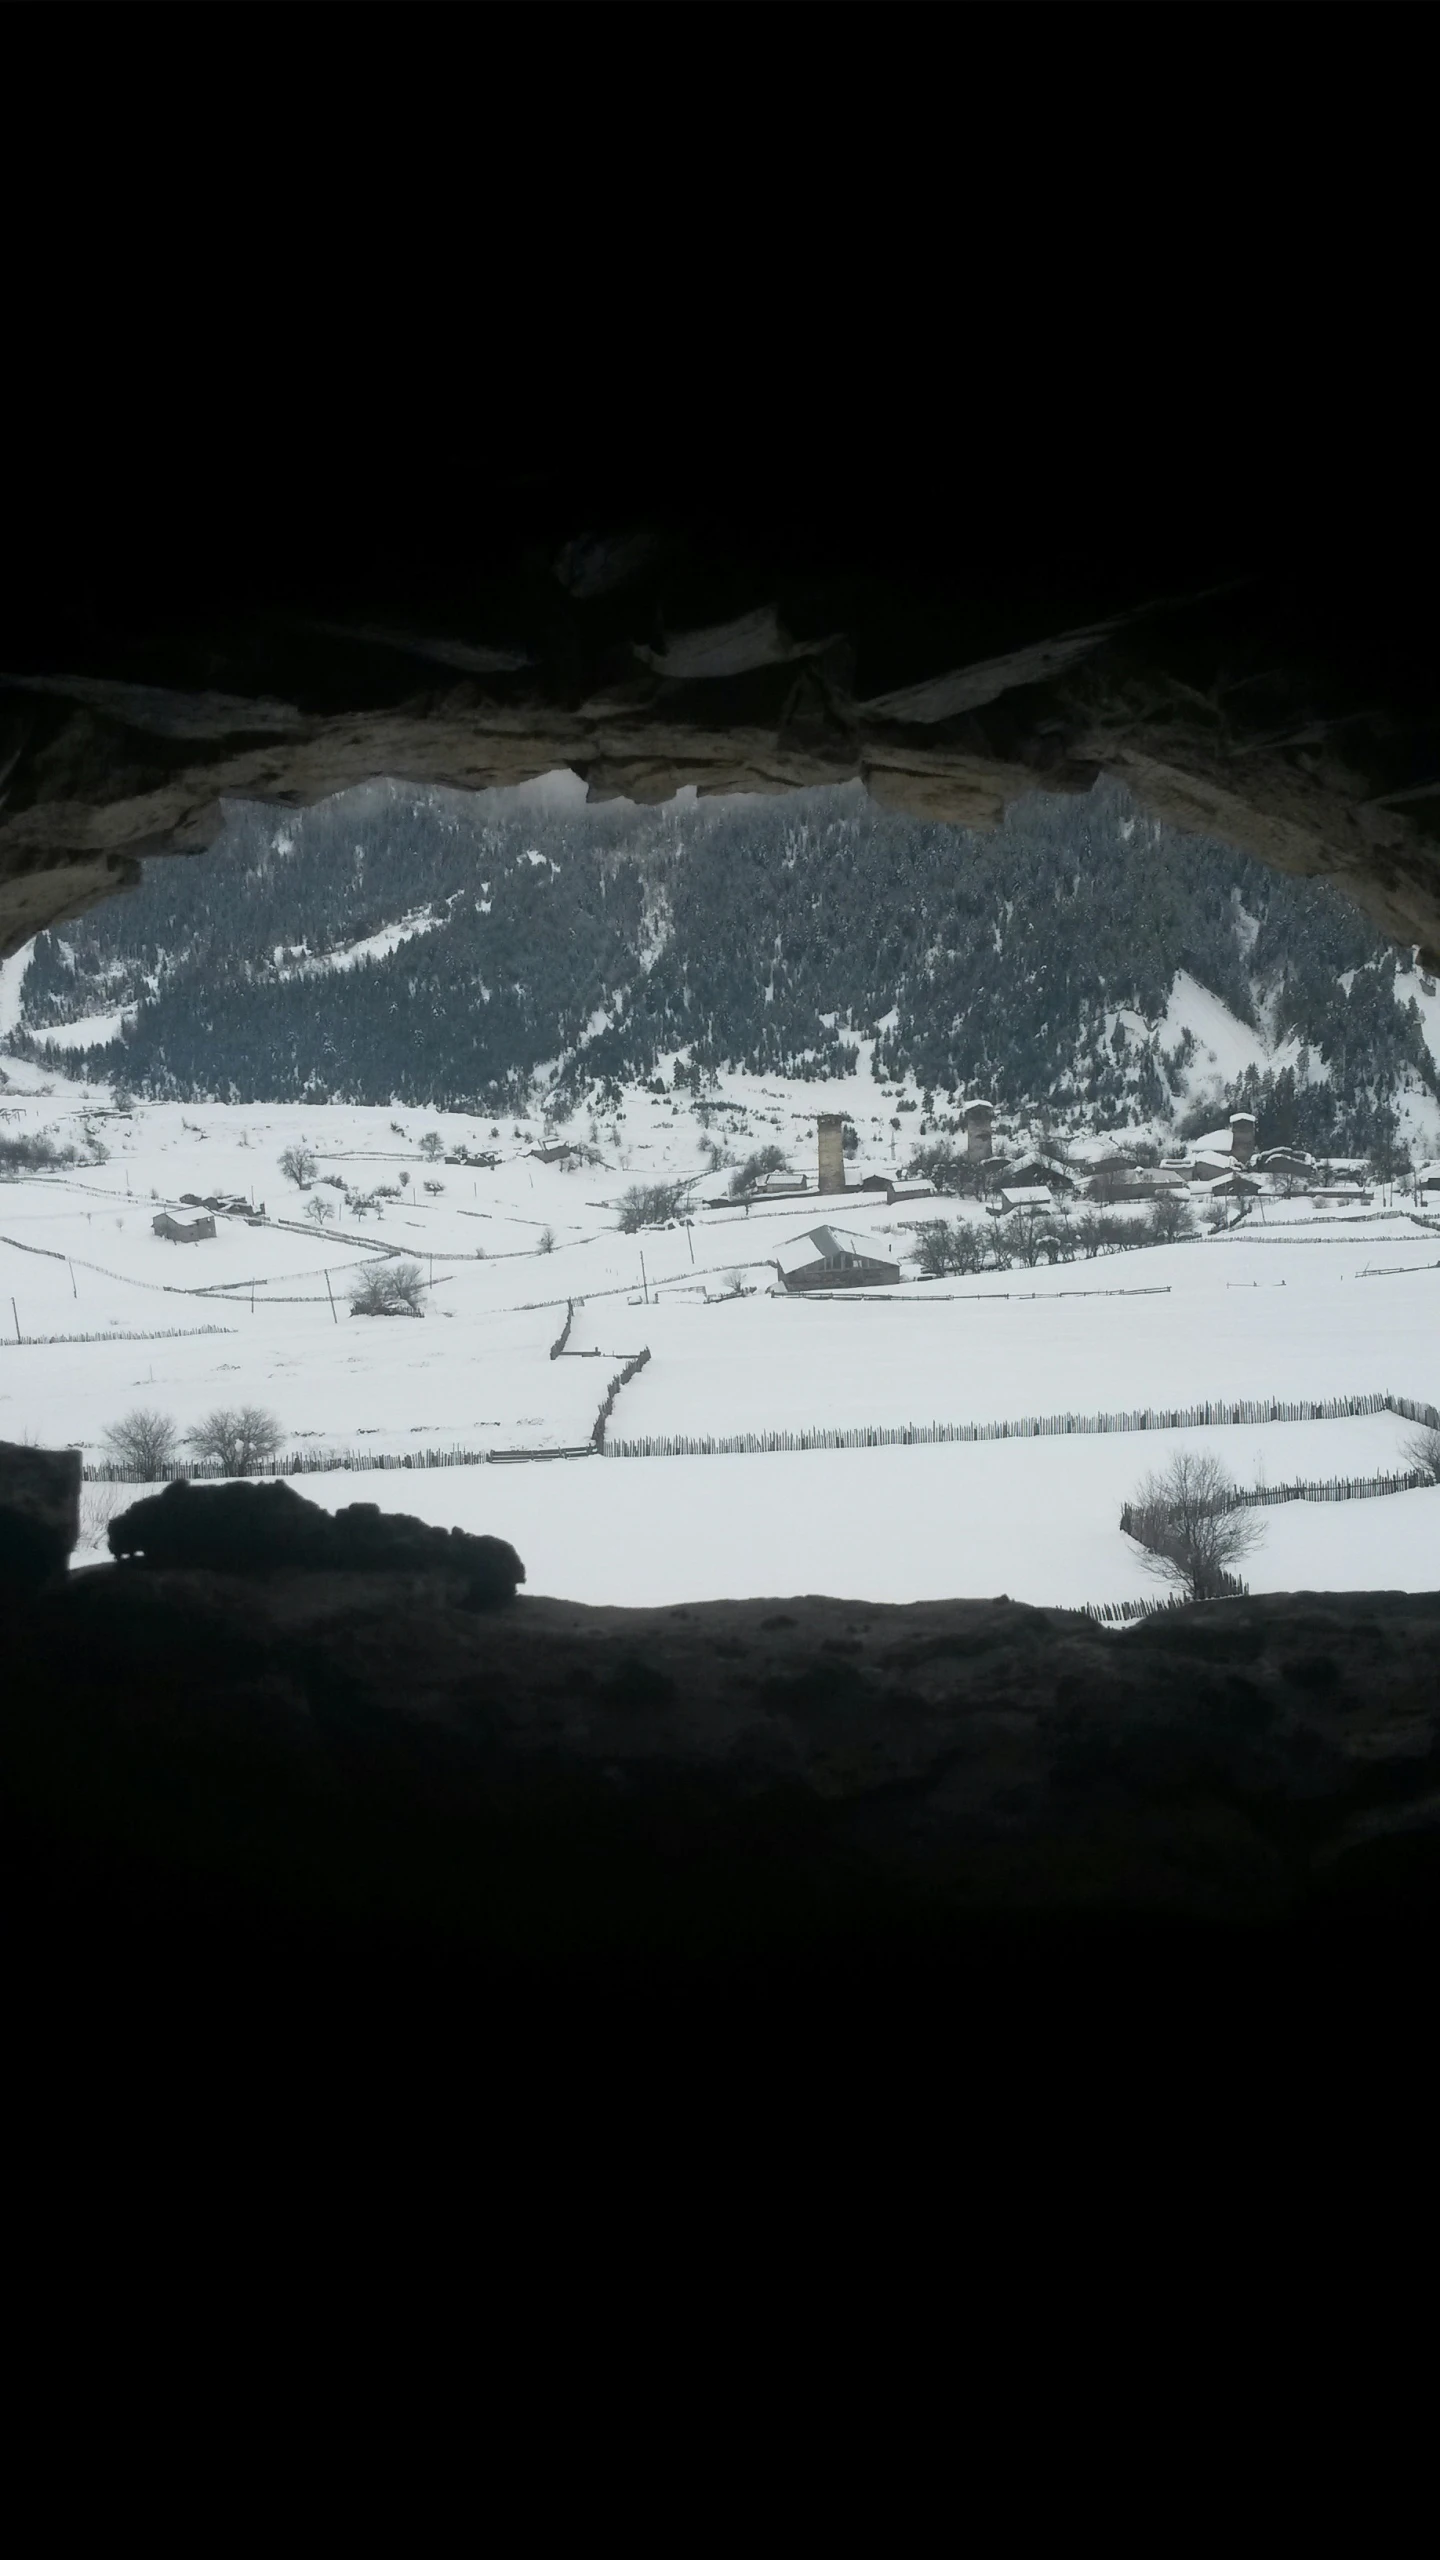 the view out of a cave into a snowy valley